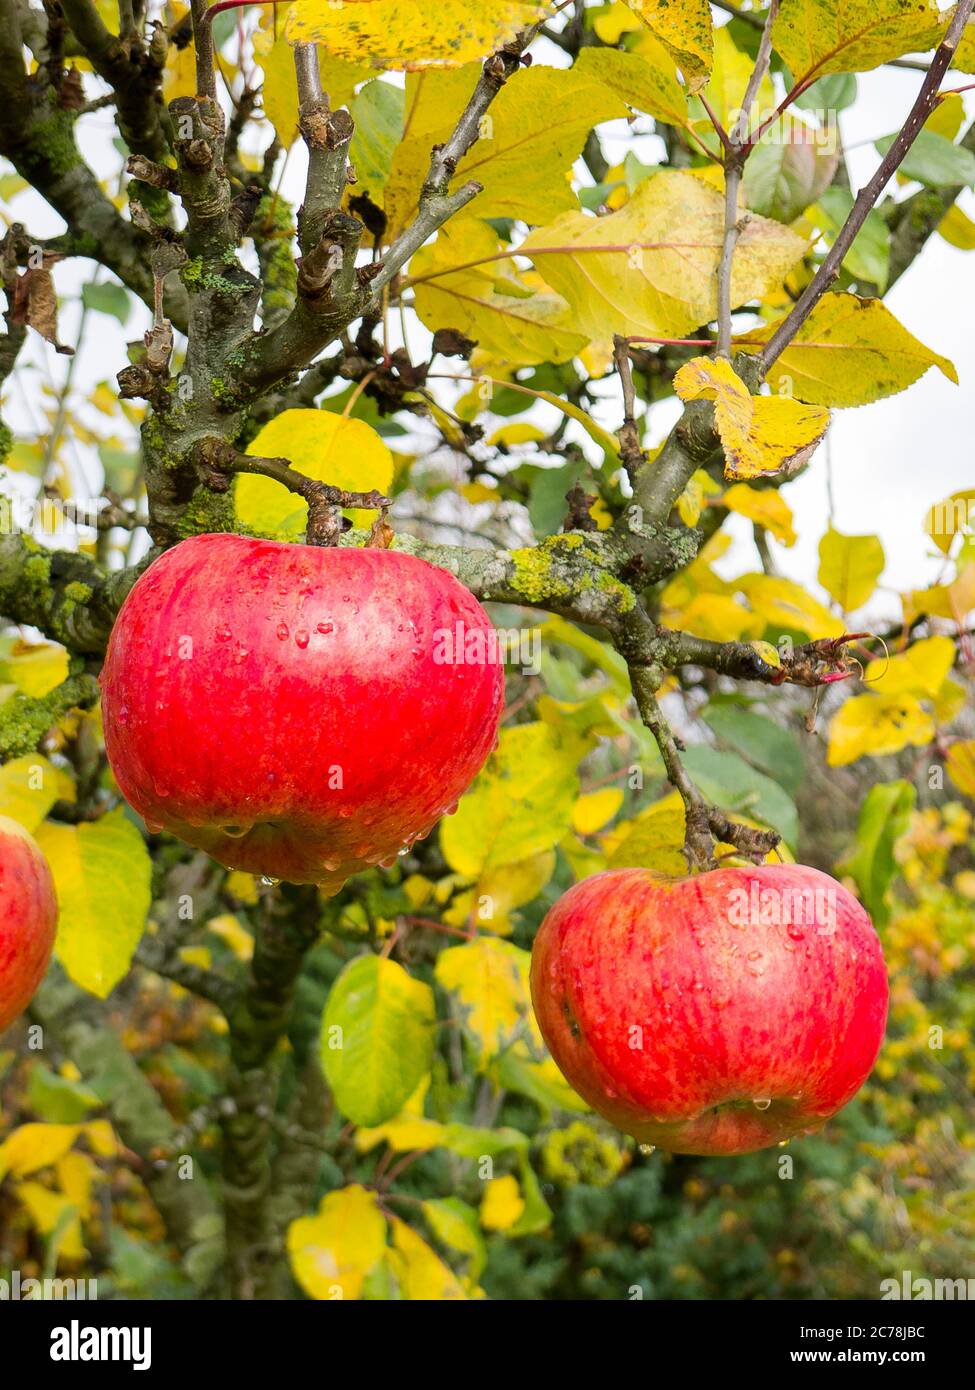 Rosy red ripe apples hanging on a Howgate Wonder apple tree in early November in an English garden in UK Stock Photo